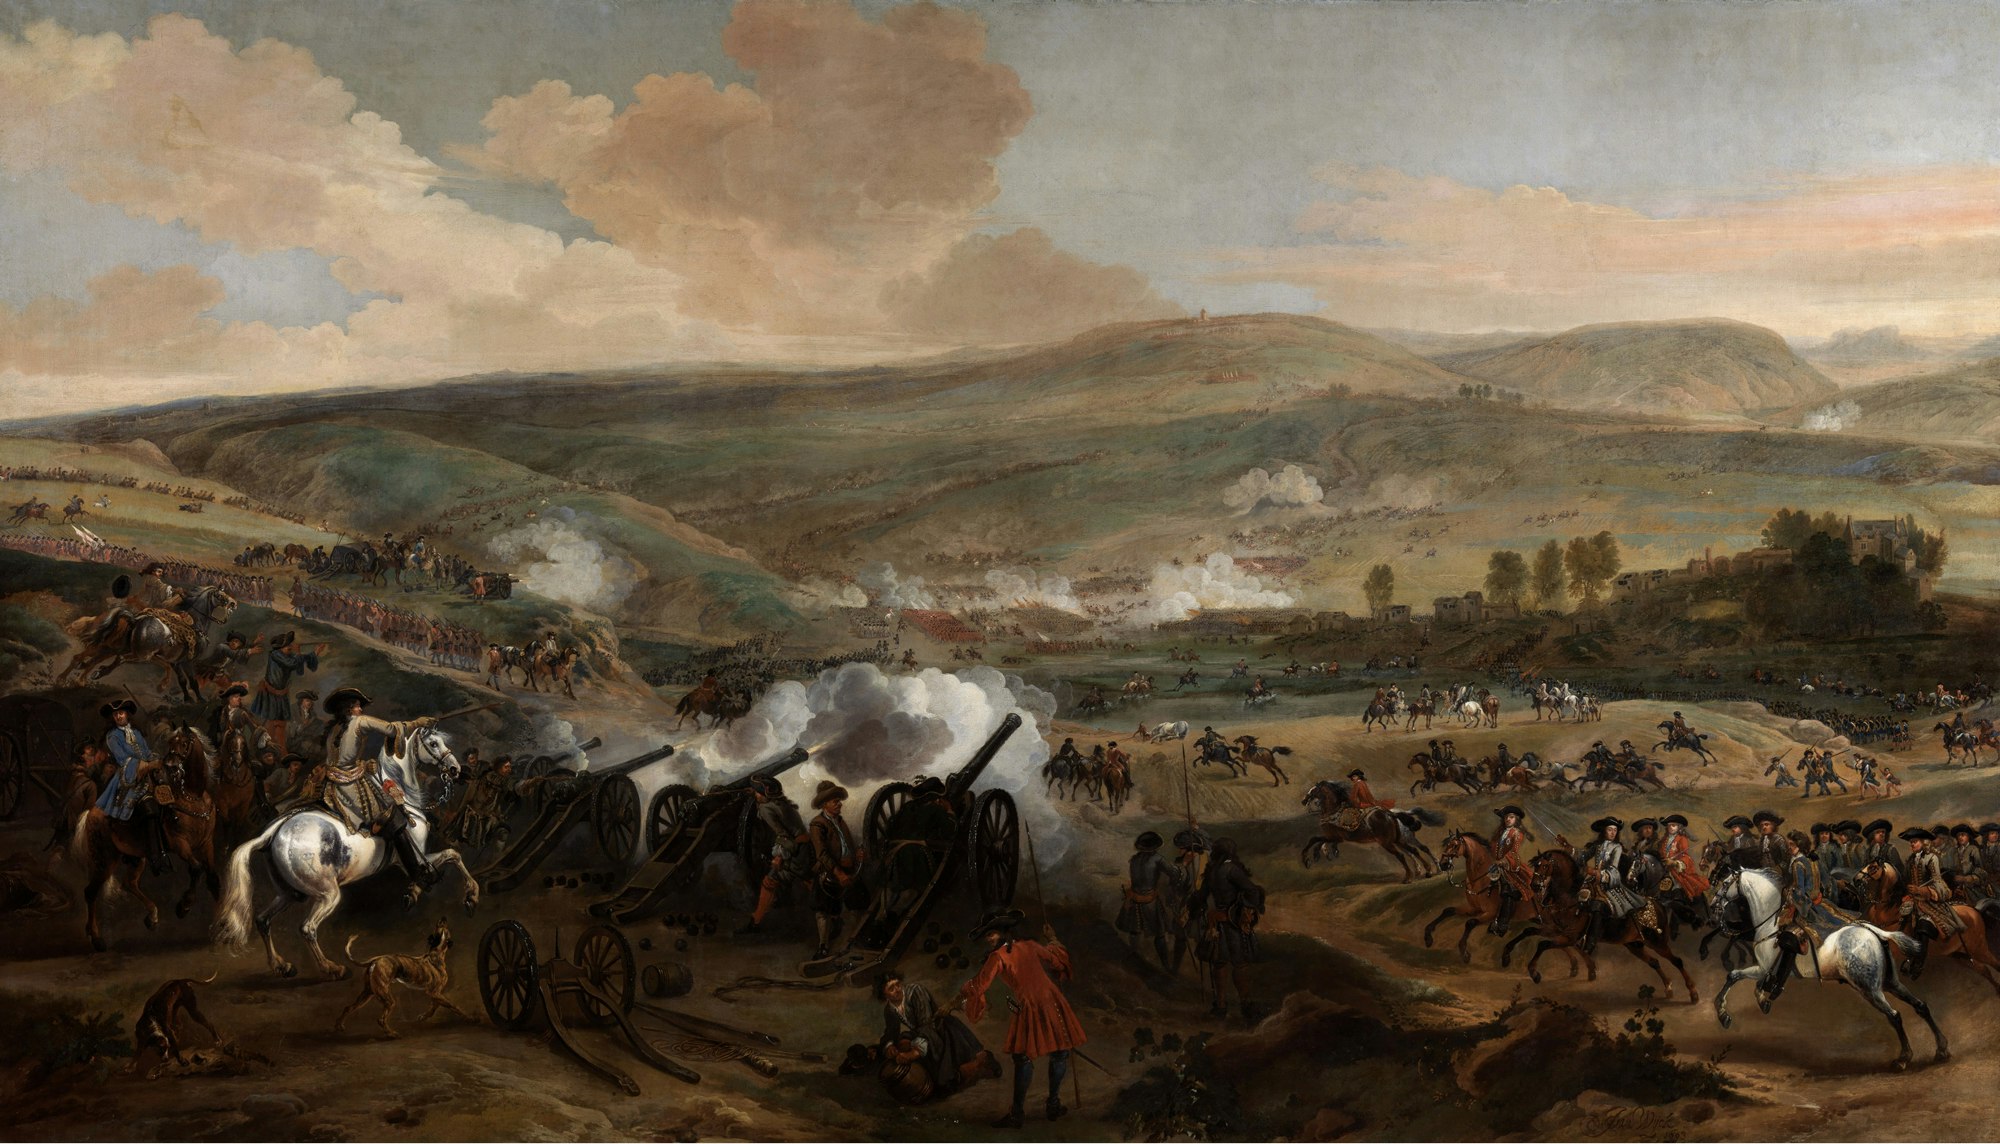 The Battle of the Boyne painting